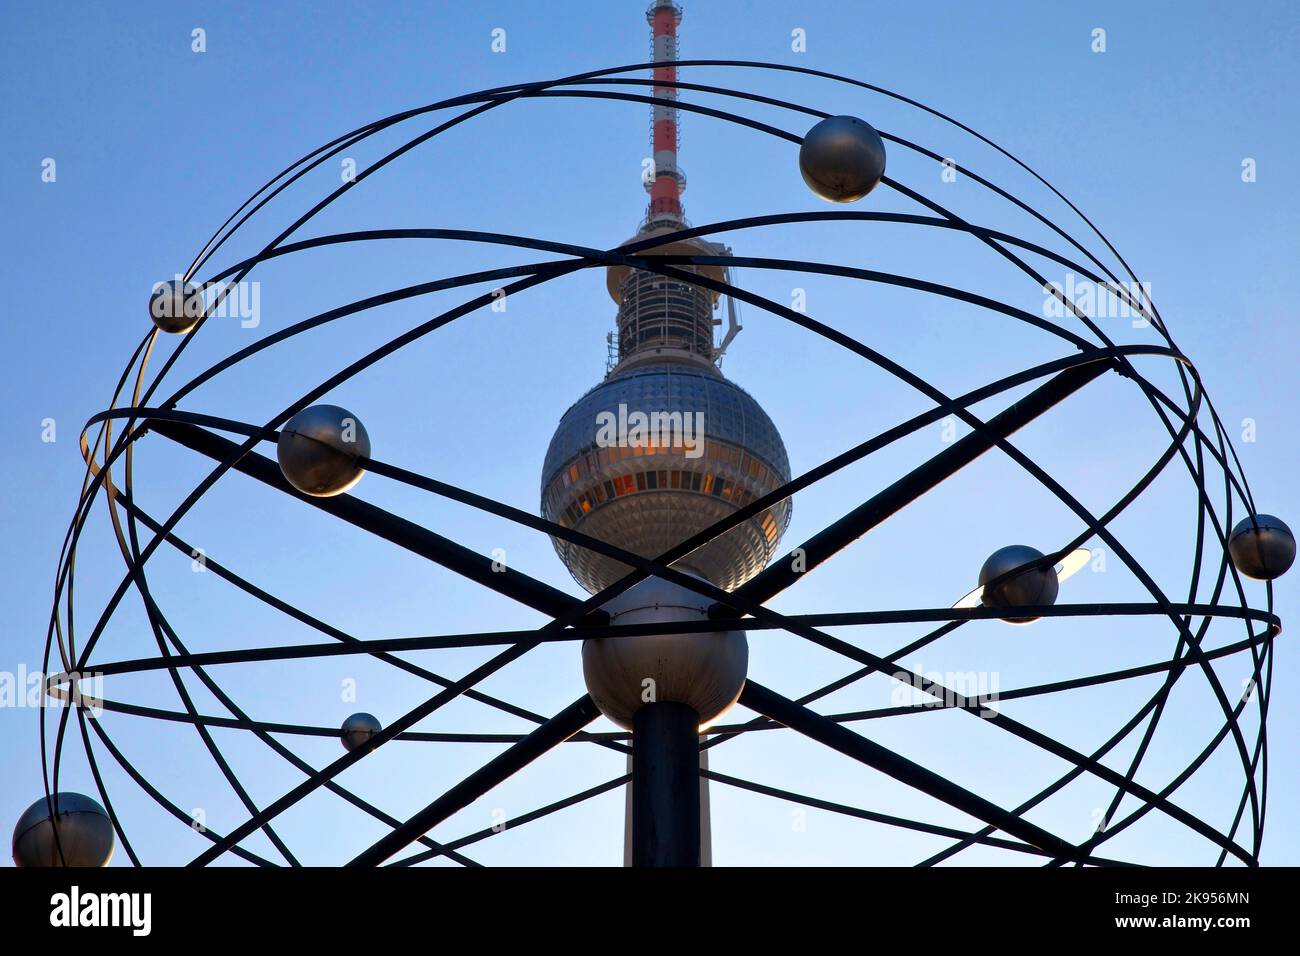 Planet model of the Urania world time clock with television tower, Alexanderplatz, Berlin Mitte, Germany, Berlin Stock Photo